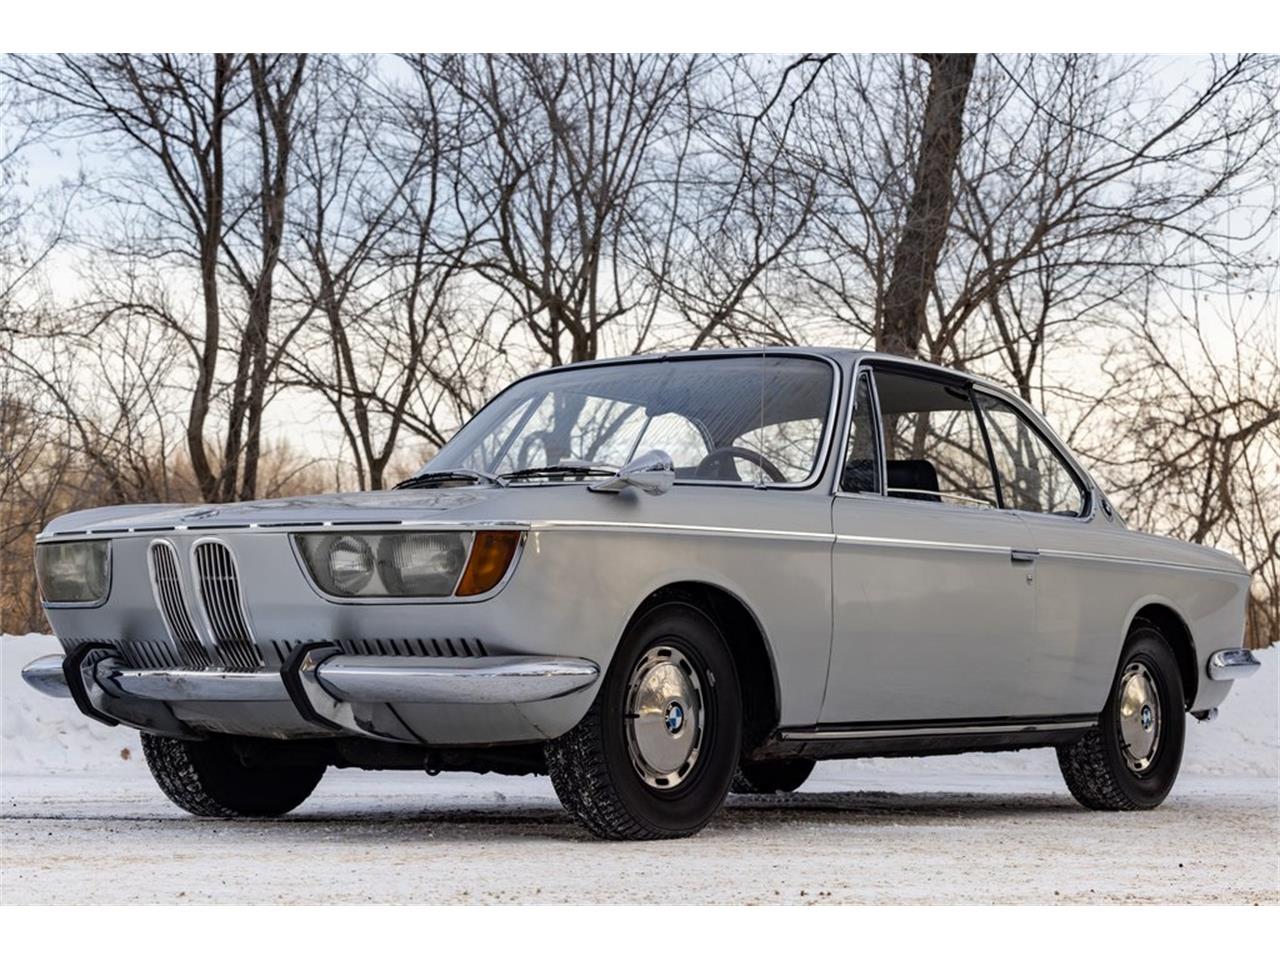 For Sale: 1965 BMW 2000 in Sioux Falls, South Dakota for sale in Sioux Falls, SD